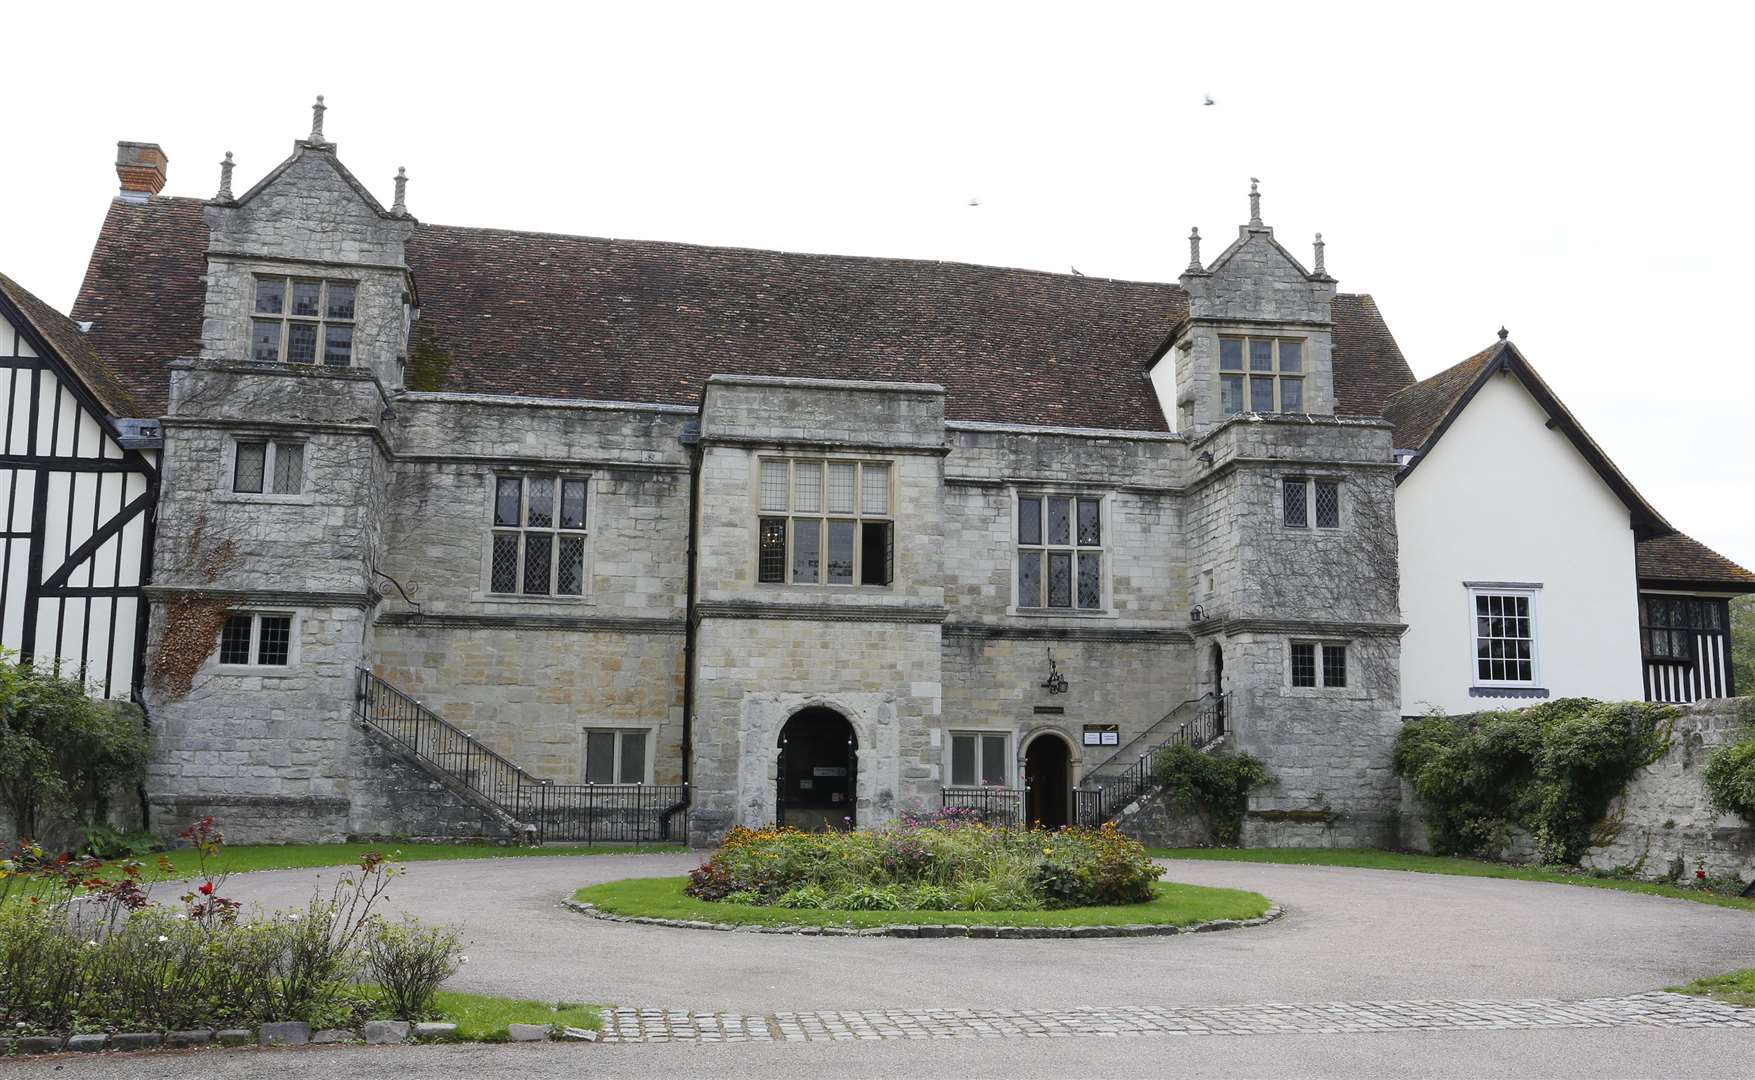 The hearing was at the Archbishop's Palace in Maidstone